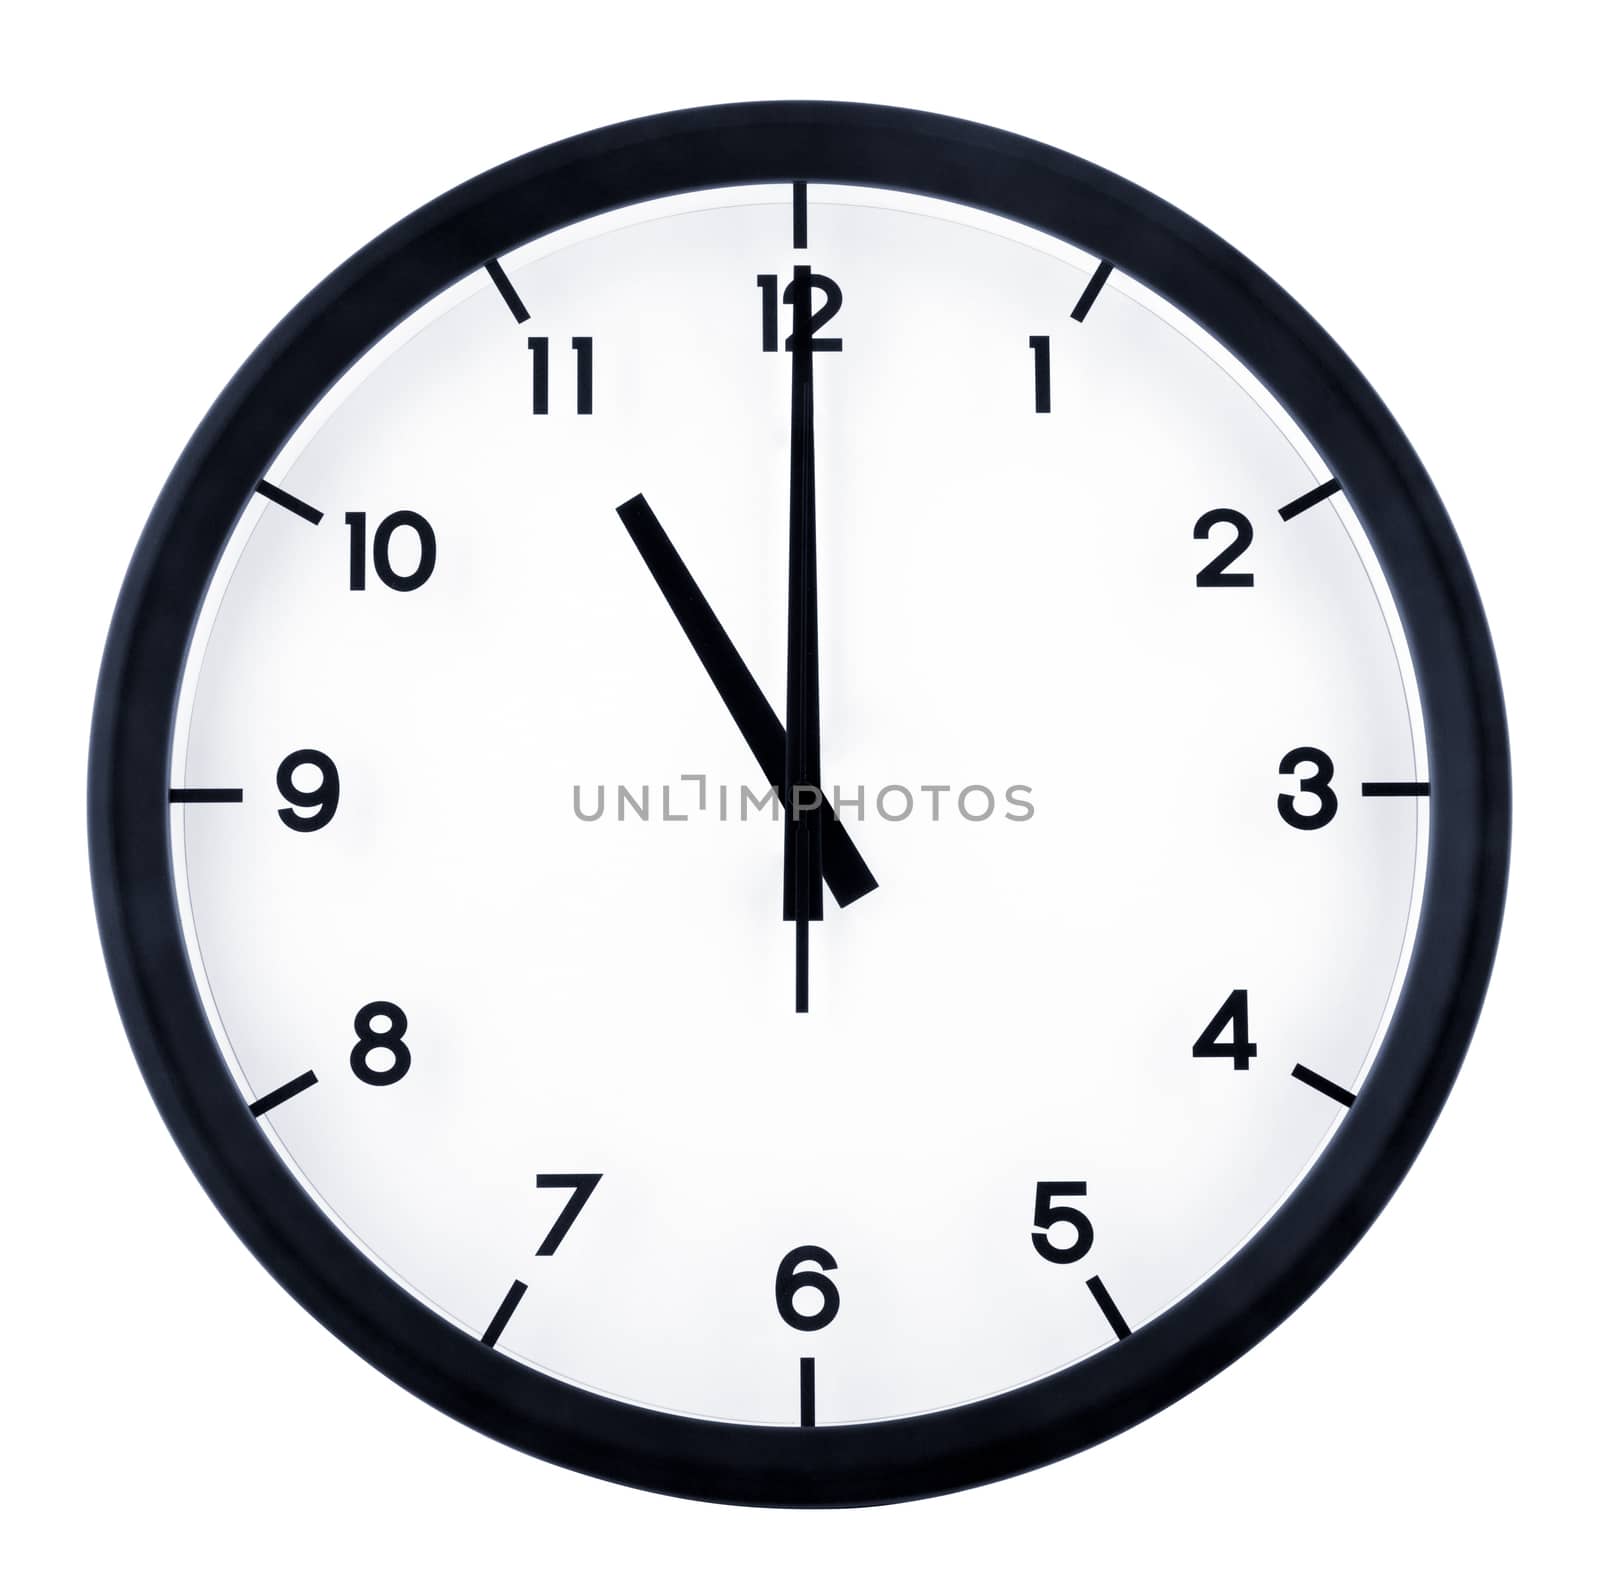 Classic analog clock pointing at 11 o'clock, isolated on white background